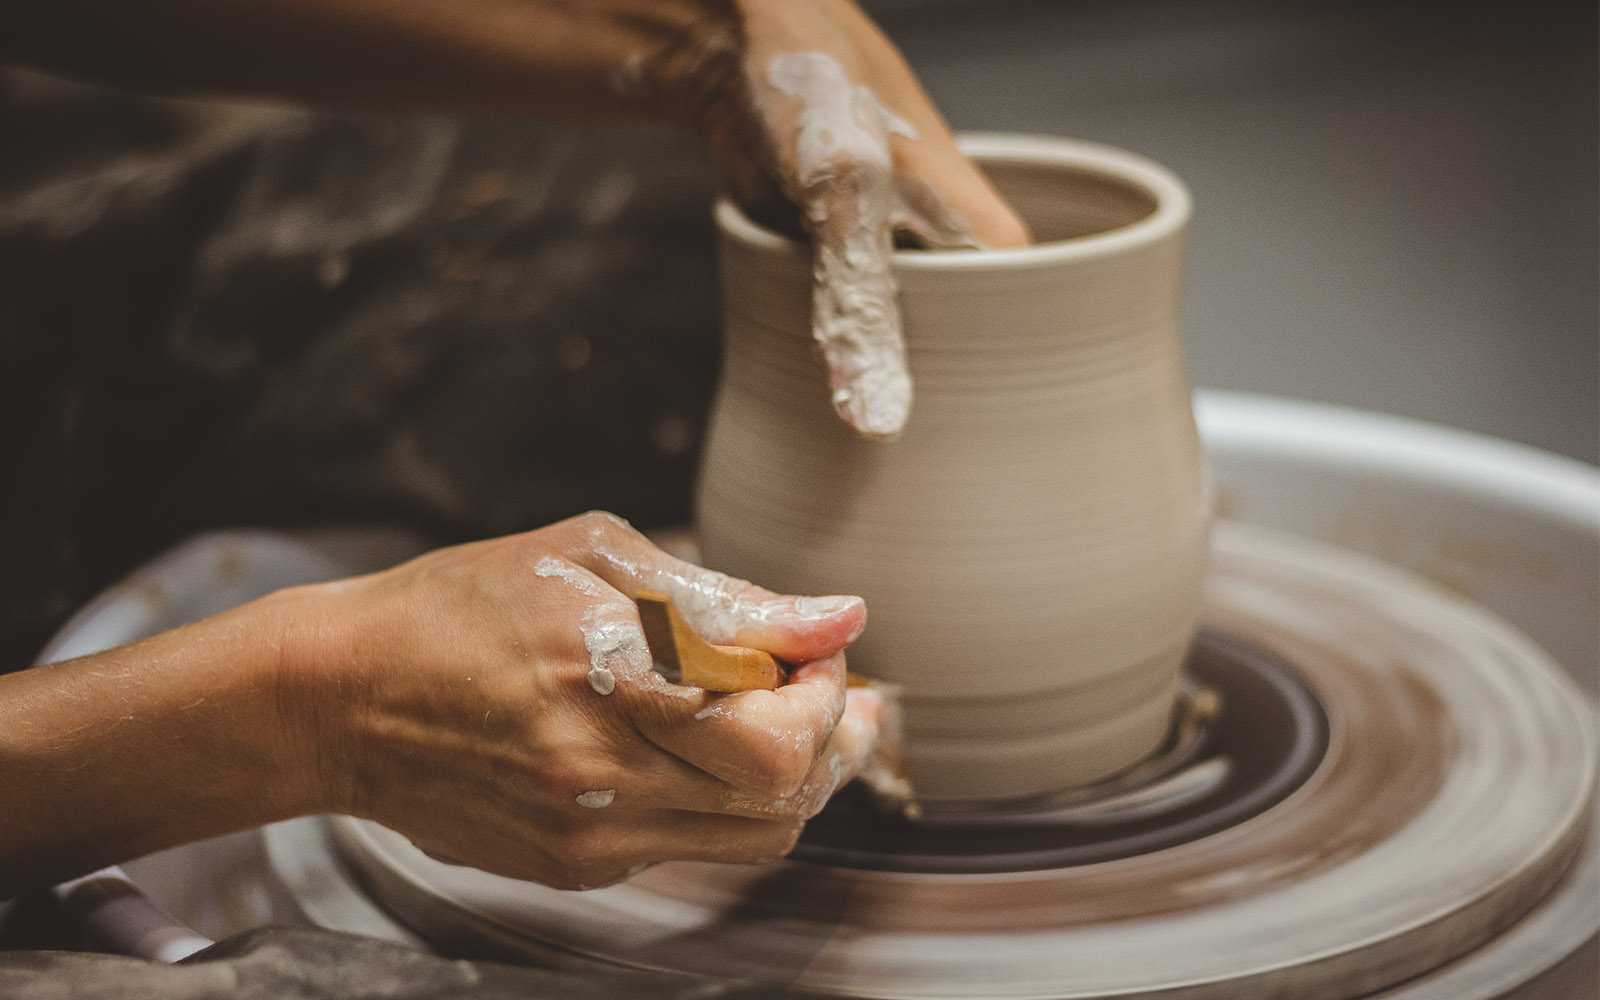 Potter hand making bowl while using pottery tools to shape